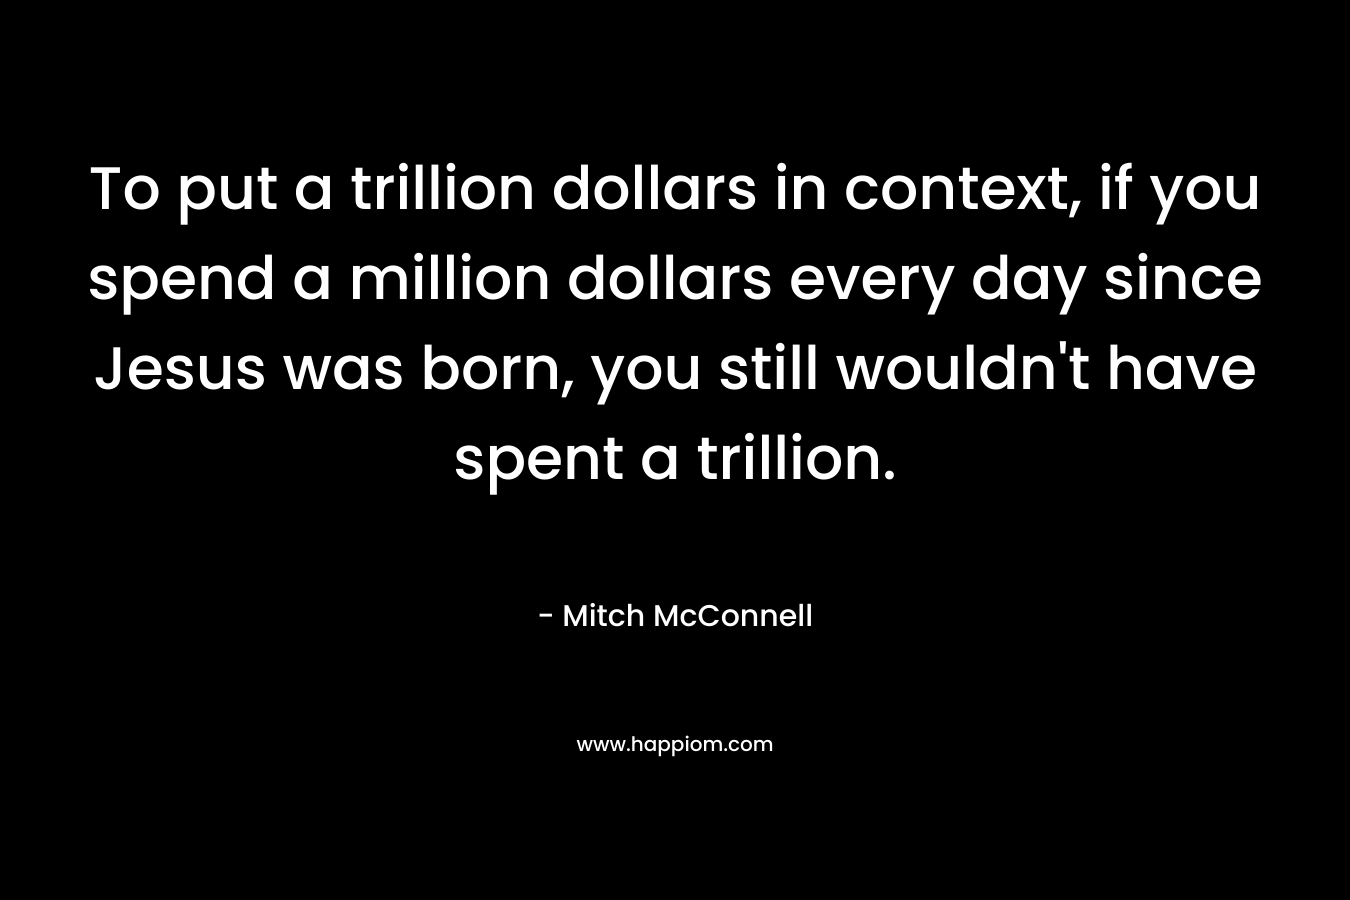 To put a trillion dollars in context, if you spend a million dollars every day since Jesus was born, you still wouldn't have spent a trillion.